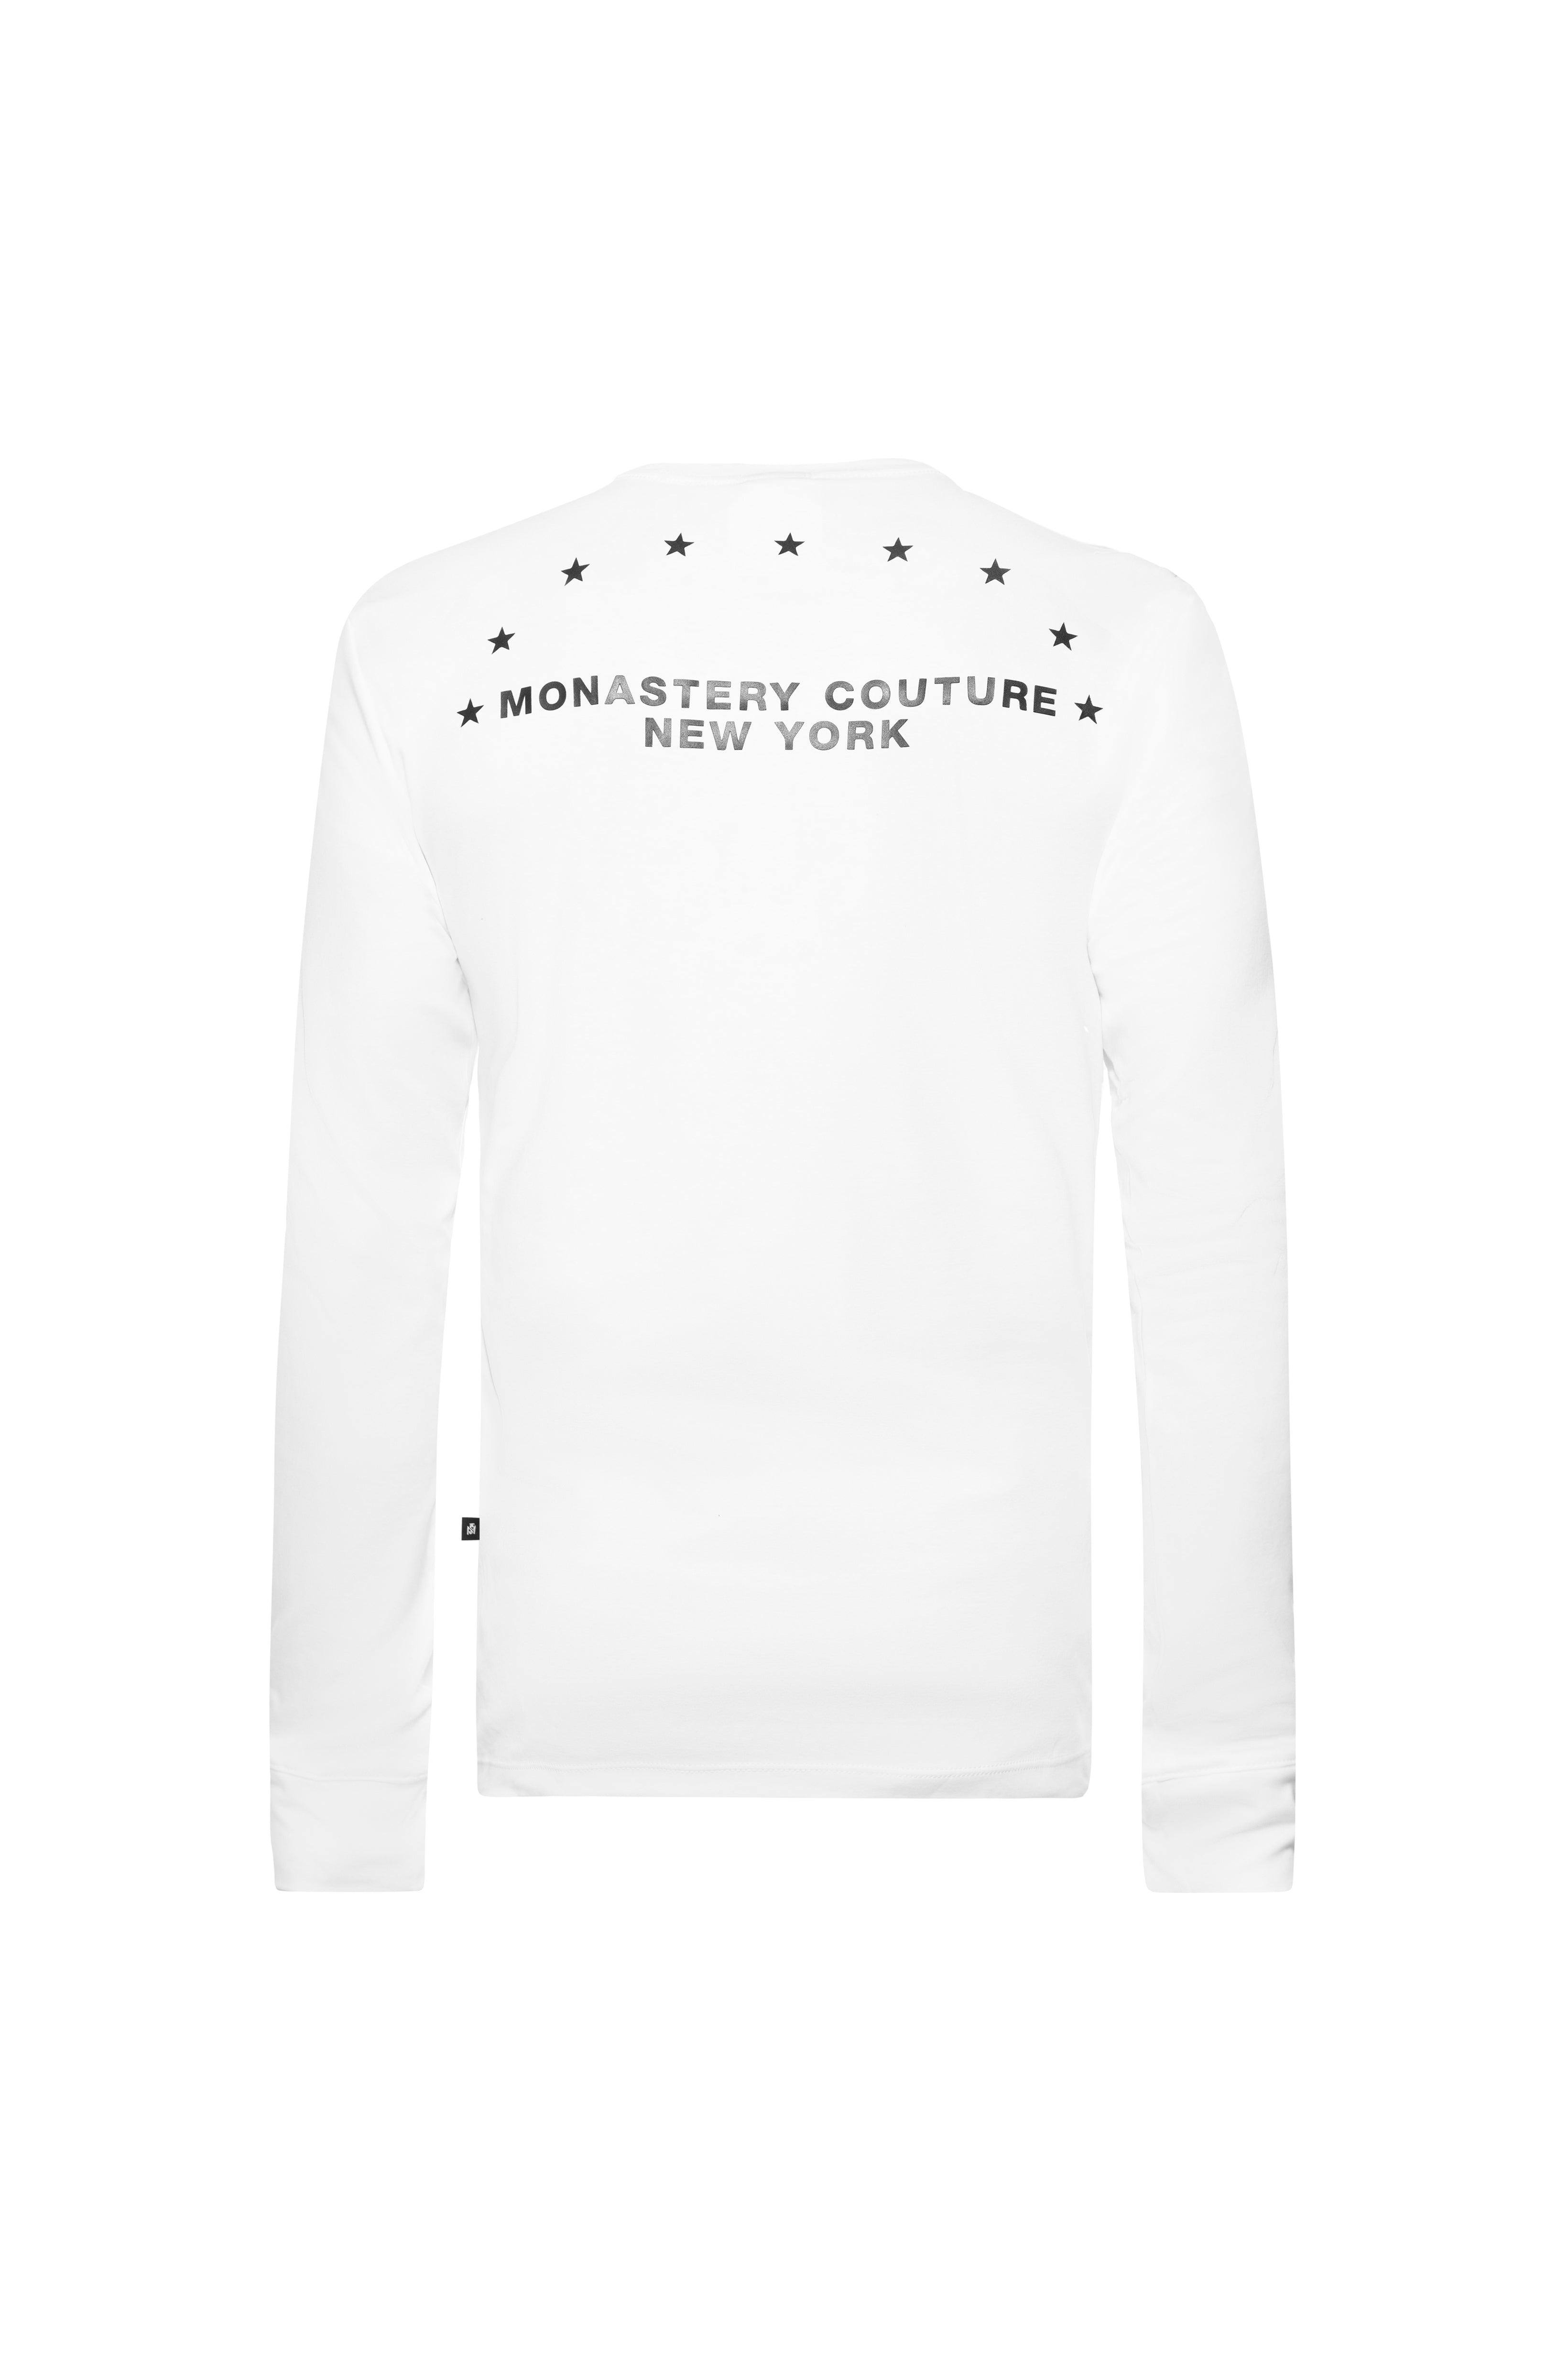 ADRIANO LONG SLEEVE WHITE | Monastery Couture